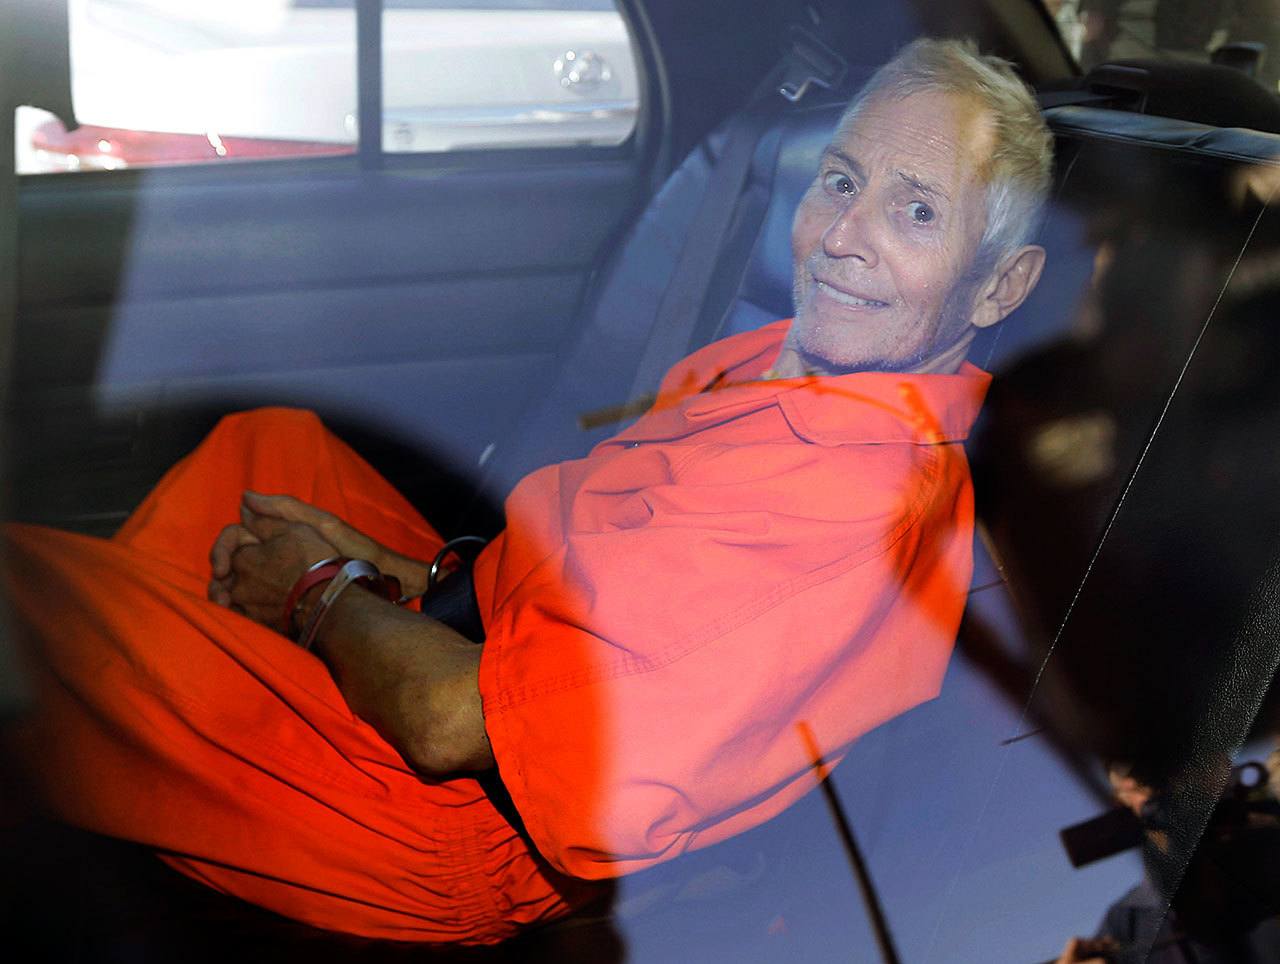 In March 17, 2015, photo, New York real estate heir Robert Durst smiles as he is transported from Orleans Parish Criminal District Court to the Orleans Parish Prison after his arraignment on murder charges in New Orleans. (AP Photo/Gerald Herbert, File)